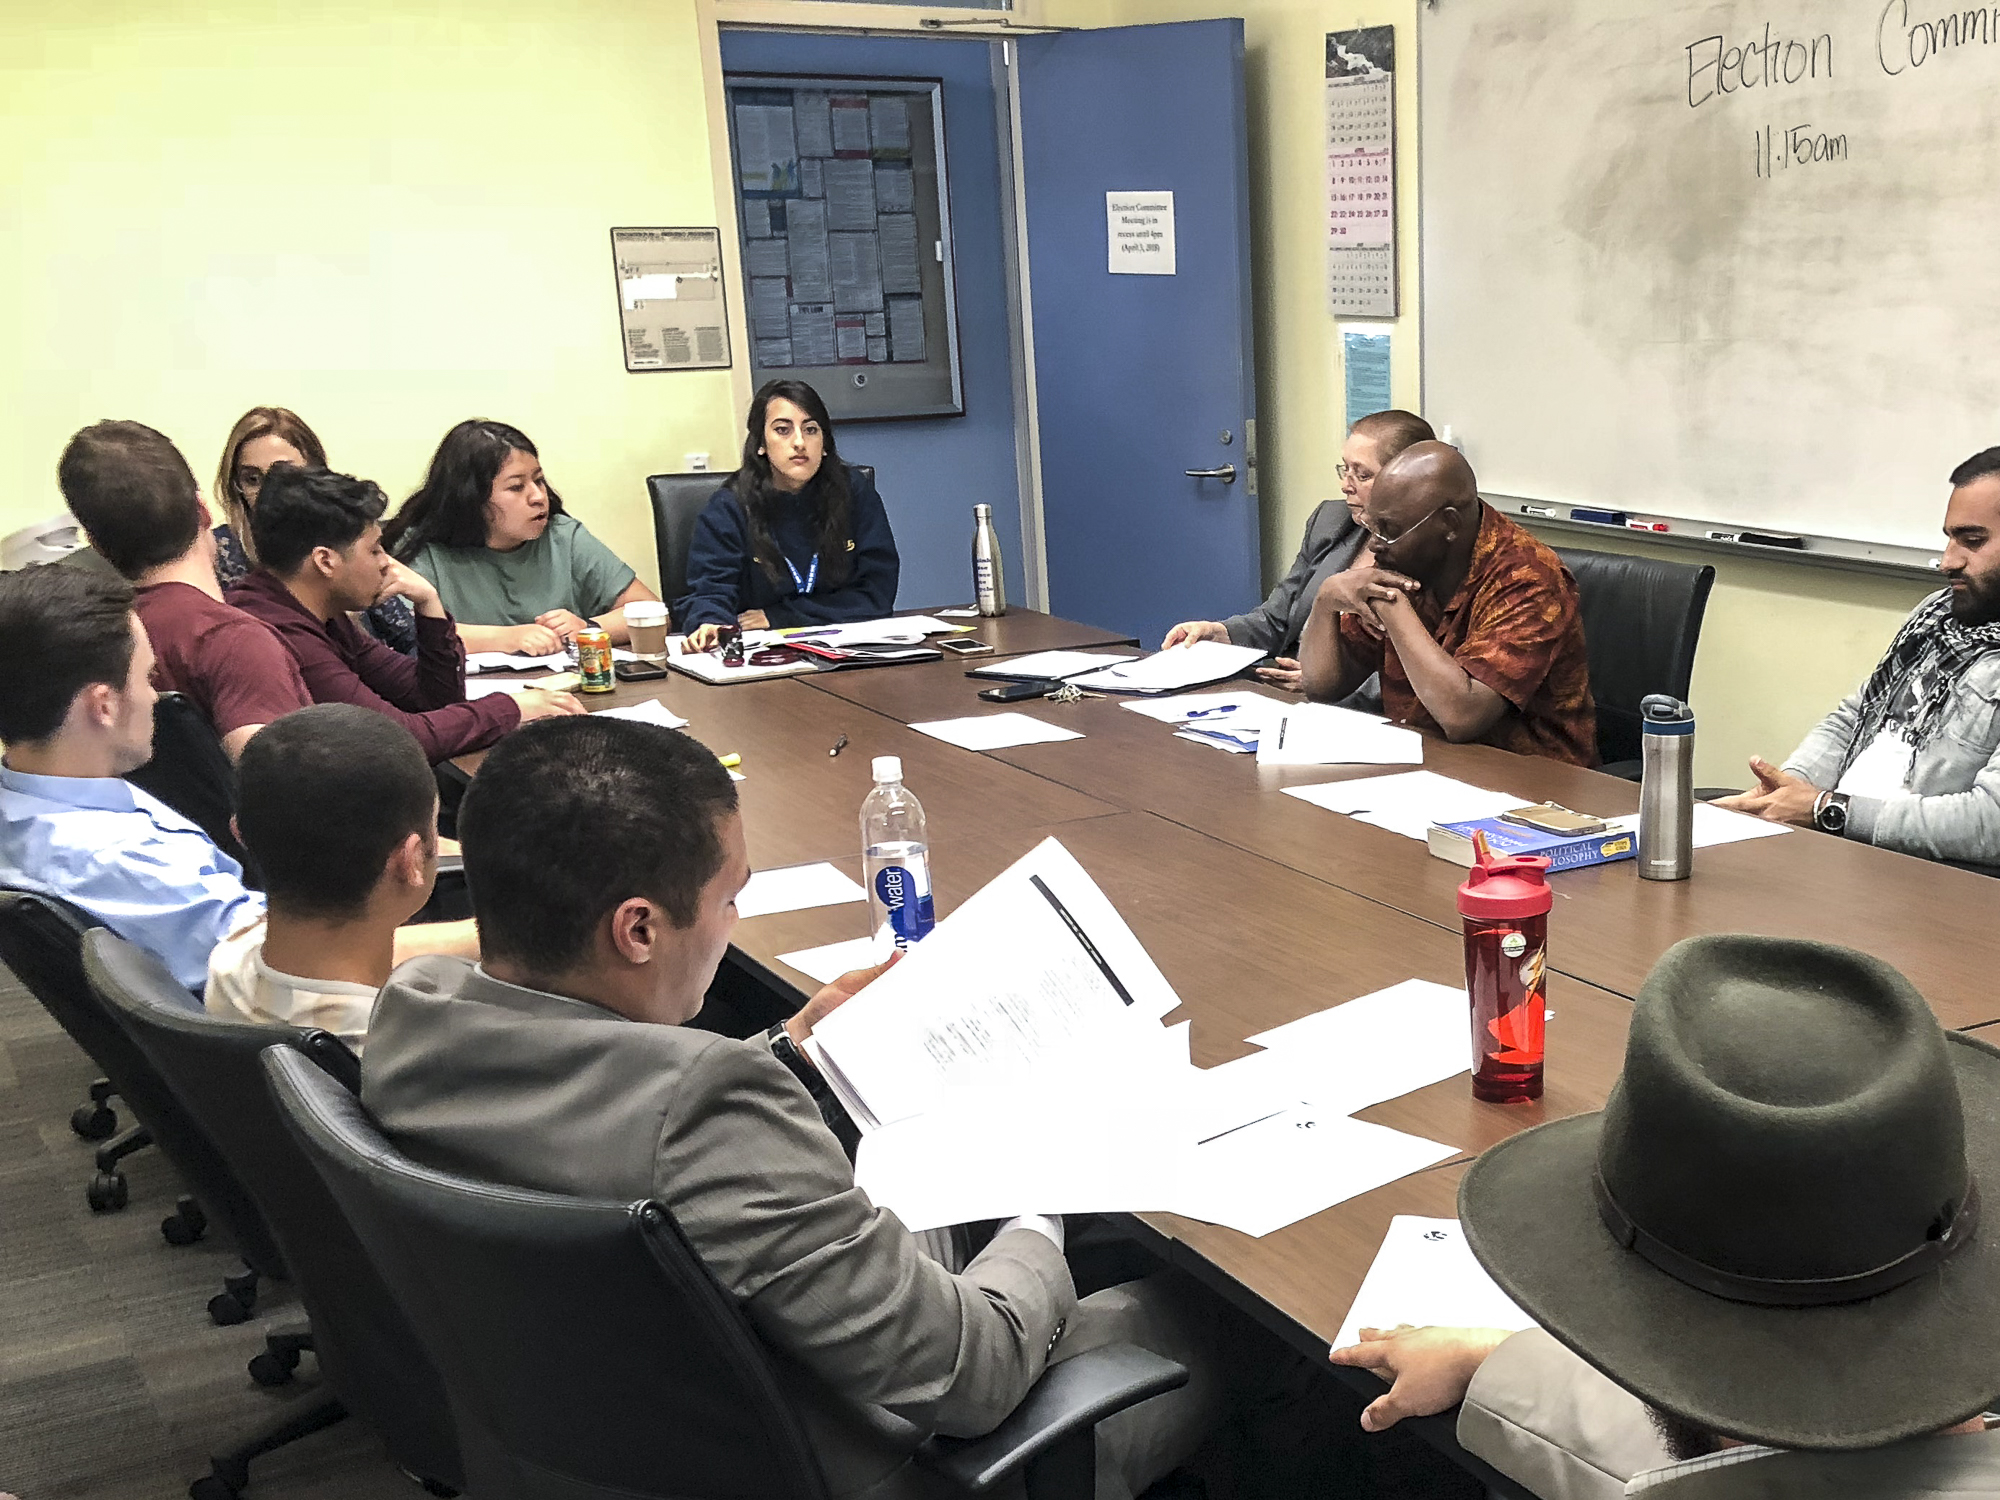  The Election Committee Members discuss a variety of filed violations amongst committee members and Associated Student candidates at the election committee meeting held in the conference room in the Cayton Center on Santa Monica College’s main campus